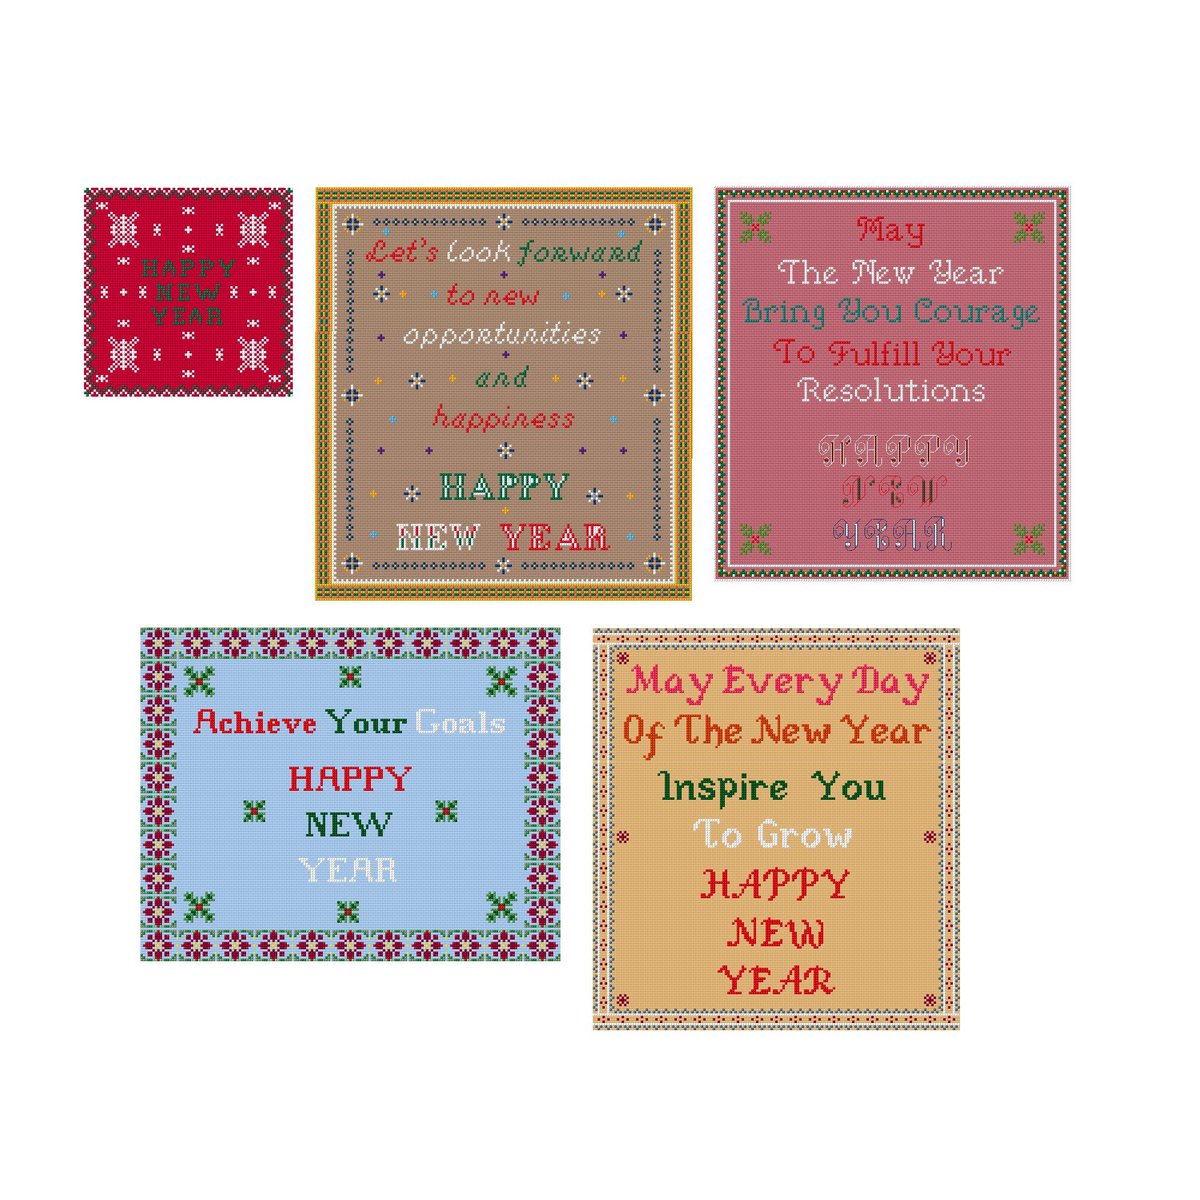 New Year Eve Cross Stitch Pattern Instant Pdf Set1 Christmas Sampler Potrait Winter Snowflakes Chart Greeting Card Counted Beginner Diy Home tuppu.net/d2126fe0 #Crossstitchfurnish #Etsy #SamplerPattern